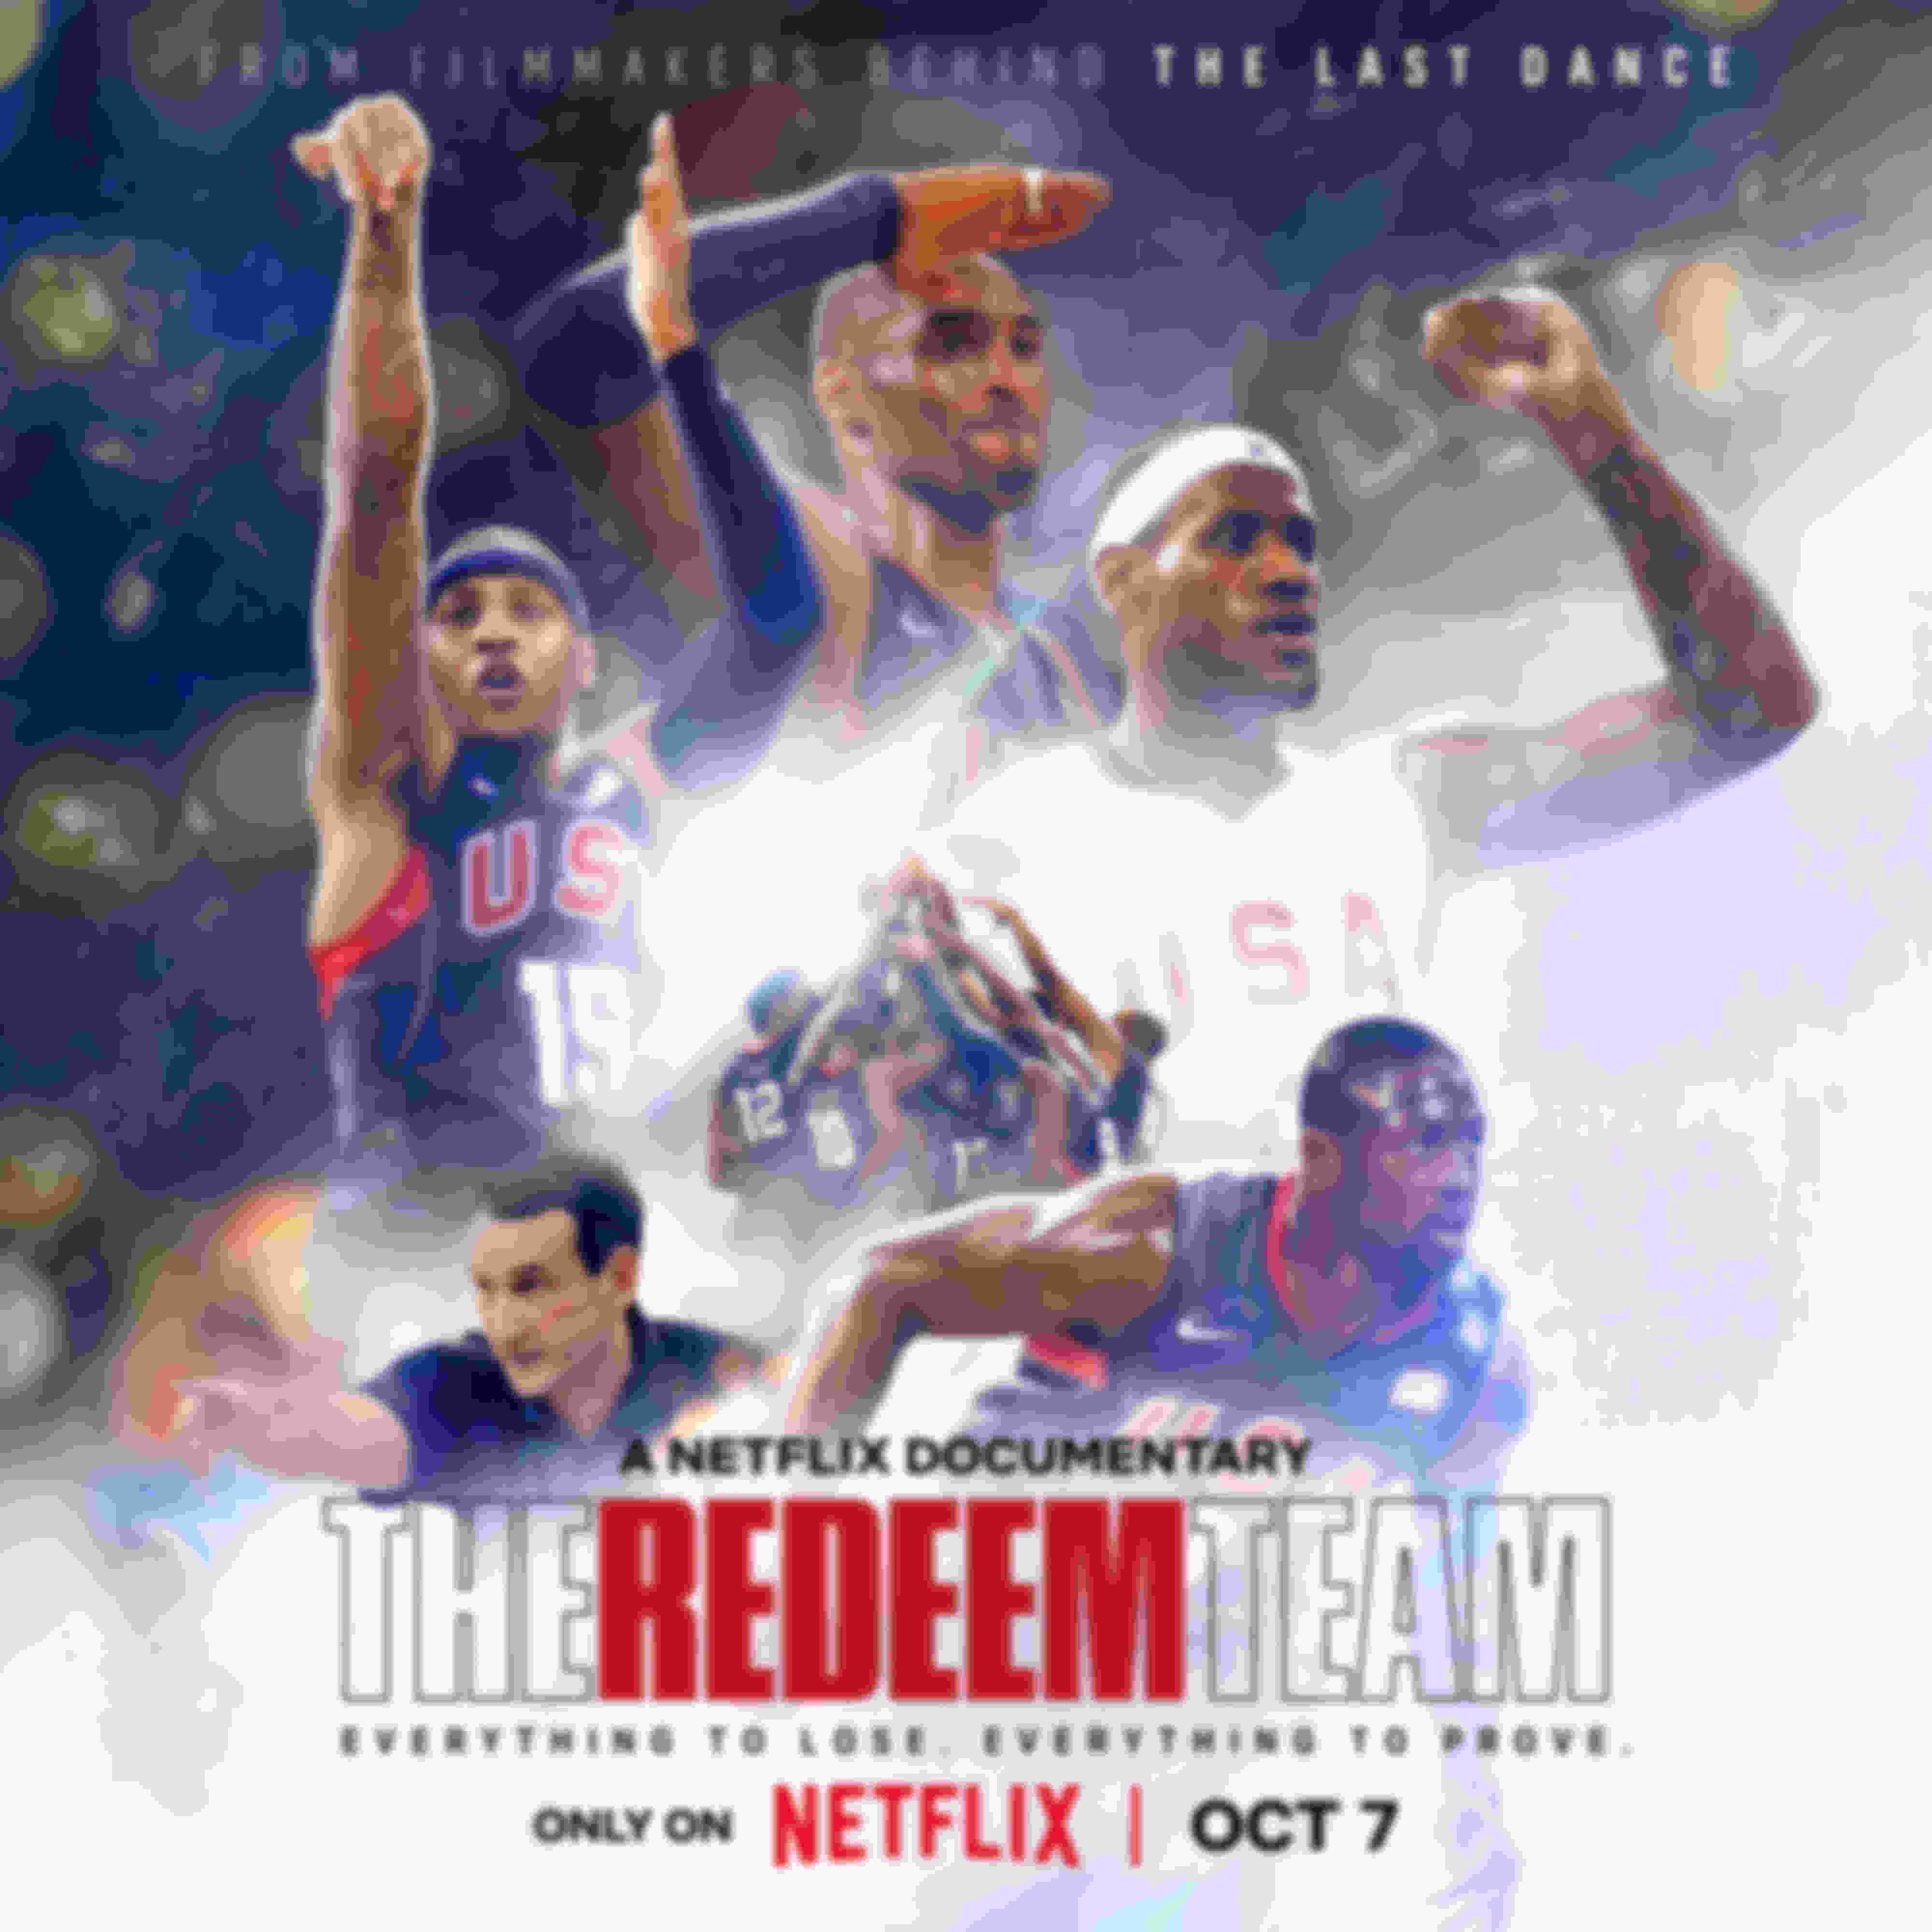 'The Redeem Team' promotional poster